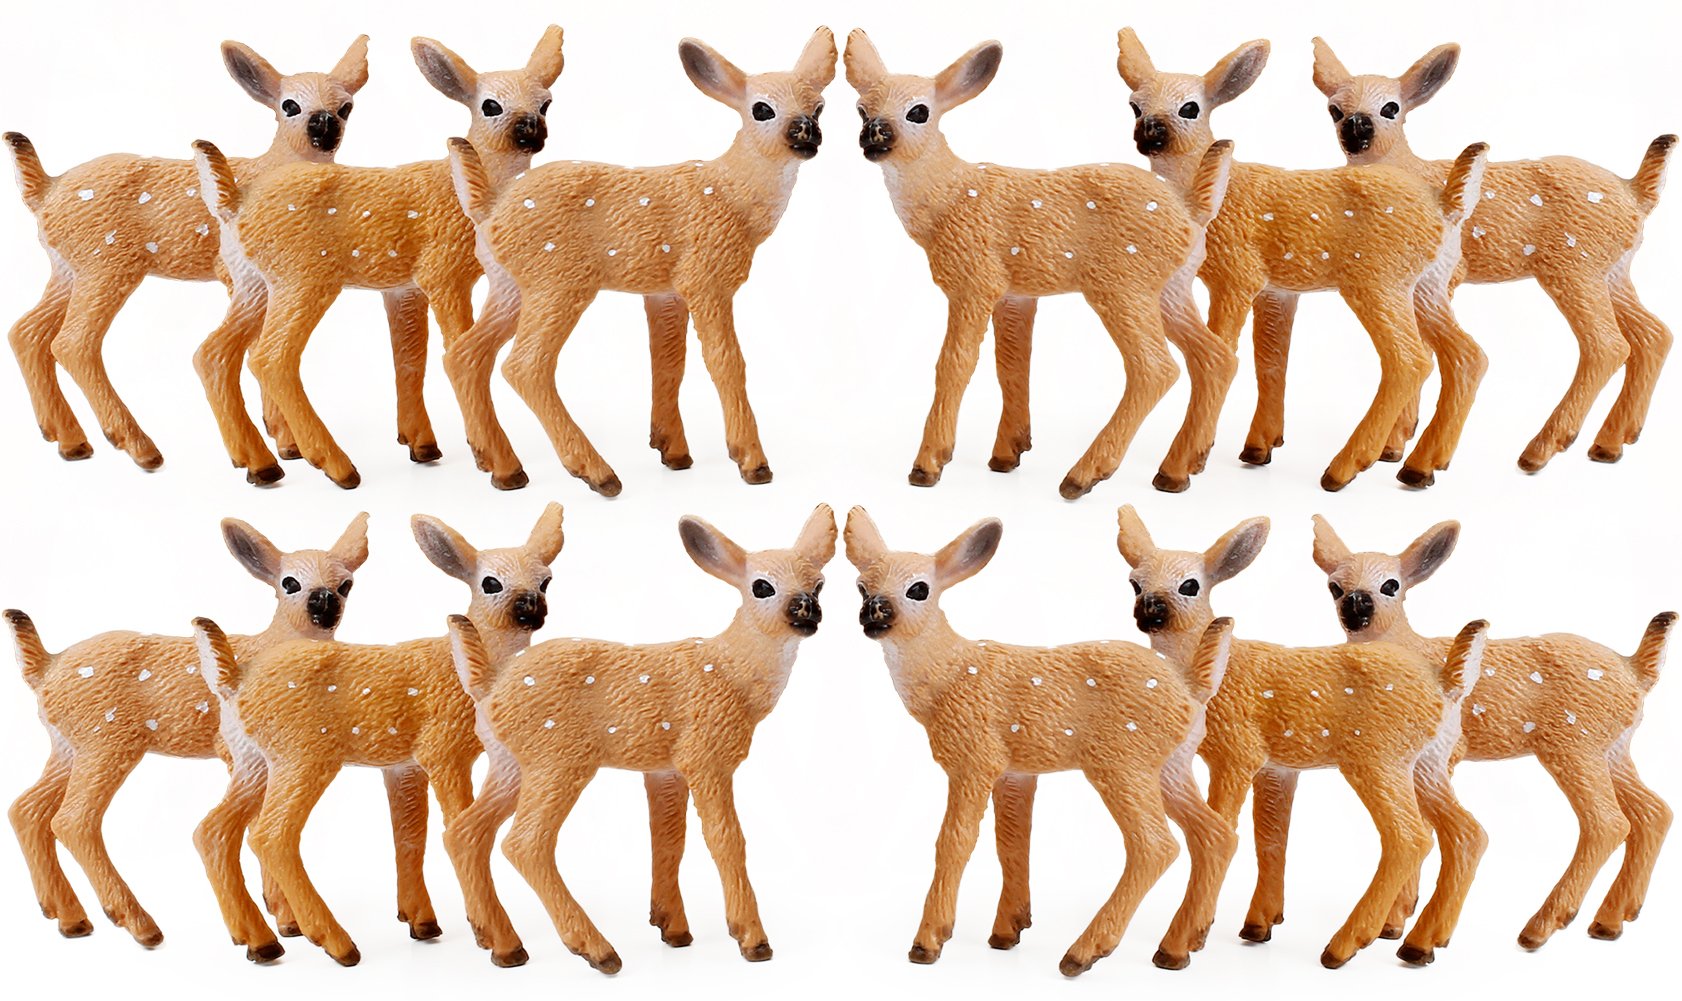 RESTCLOUD 12Pcs Deer Figurines Cake Toppers, Deer Toys Figure, Small Woodland Animals Set of 12 Fawn